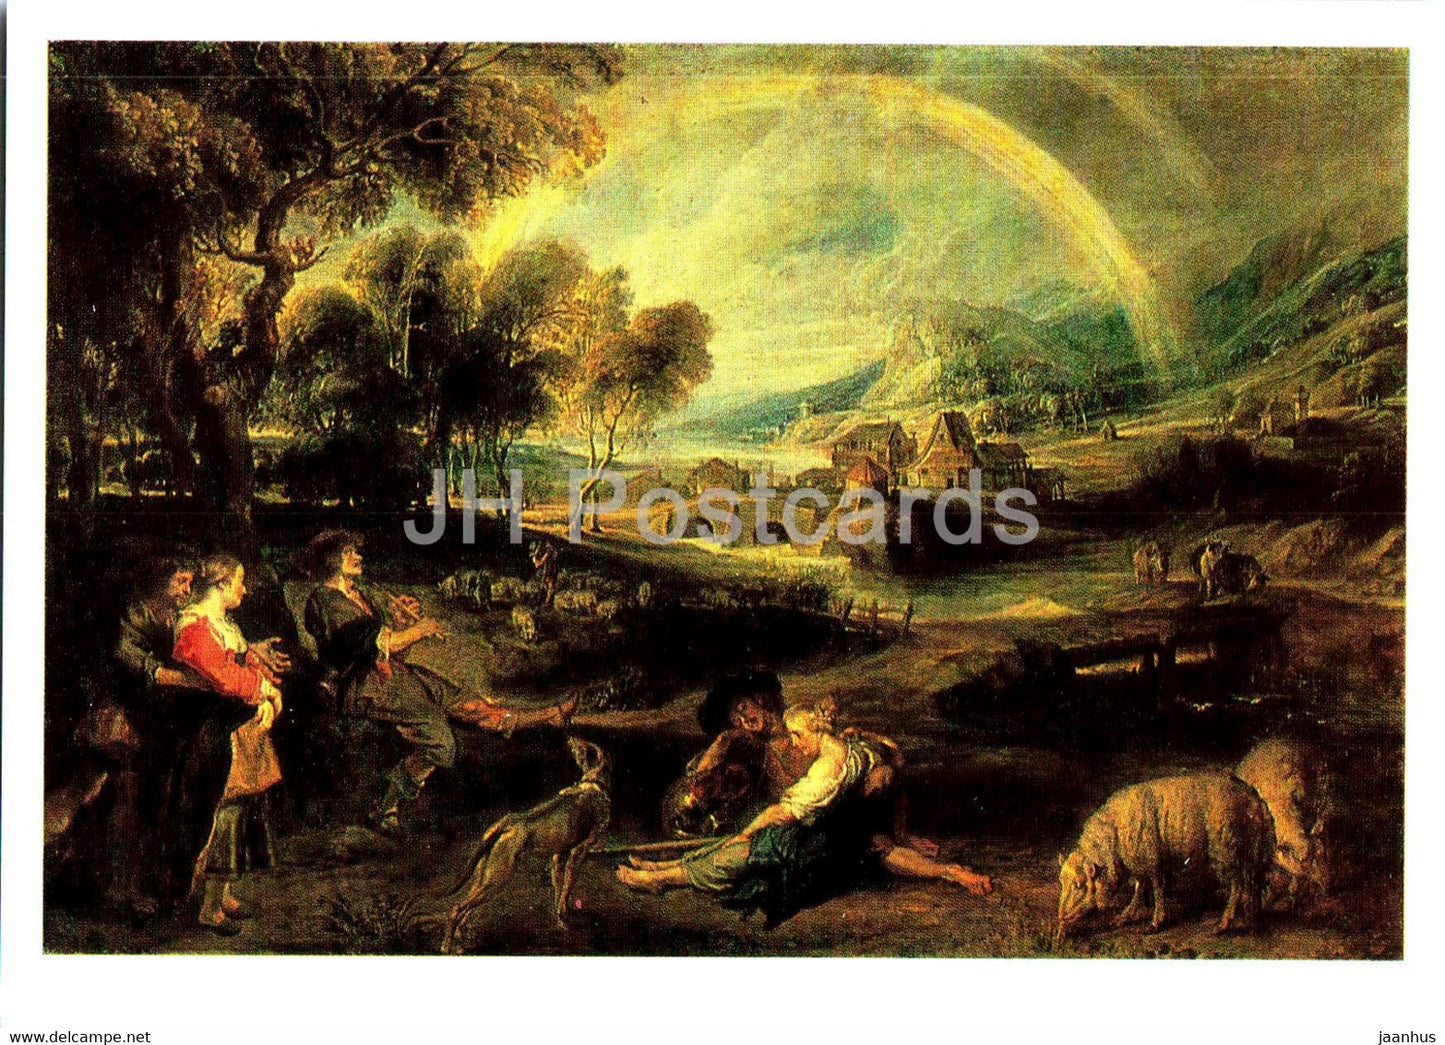 painting by Peter Paul Rubens - Landscape with a Rainbow - Flemish art - 1988 - Russia USSR - unused - JH Postcards